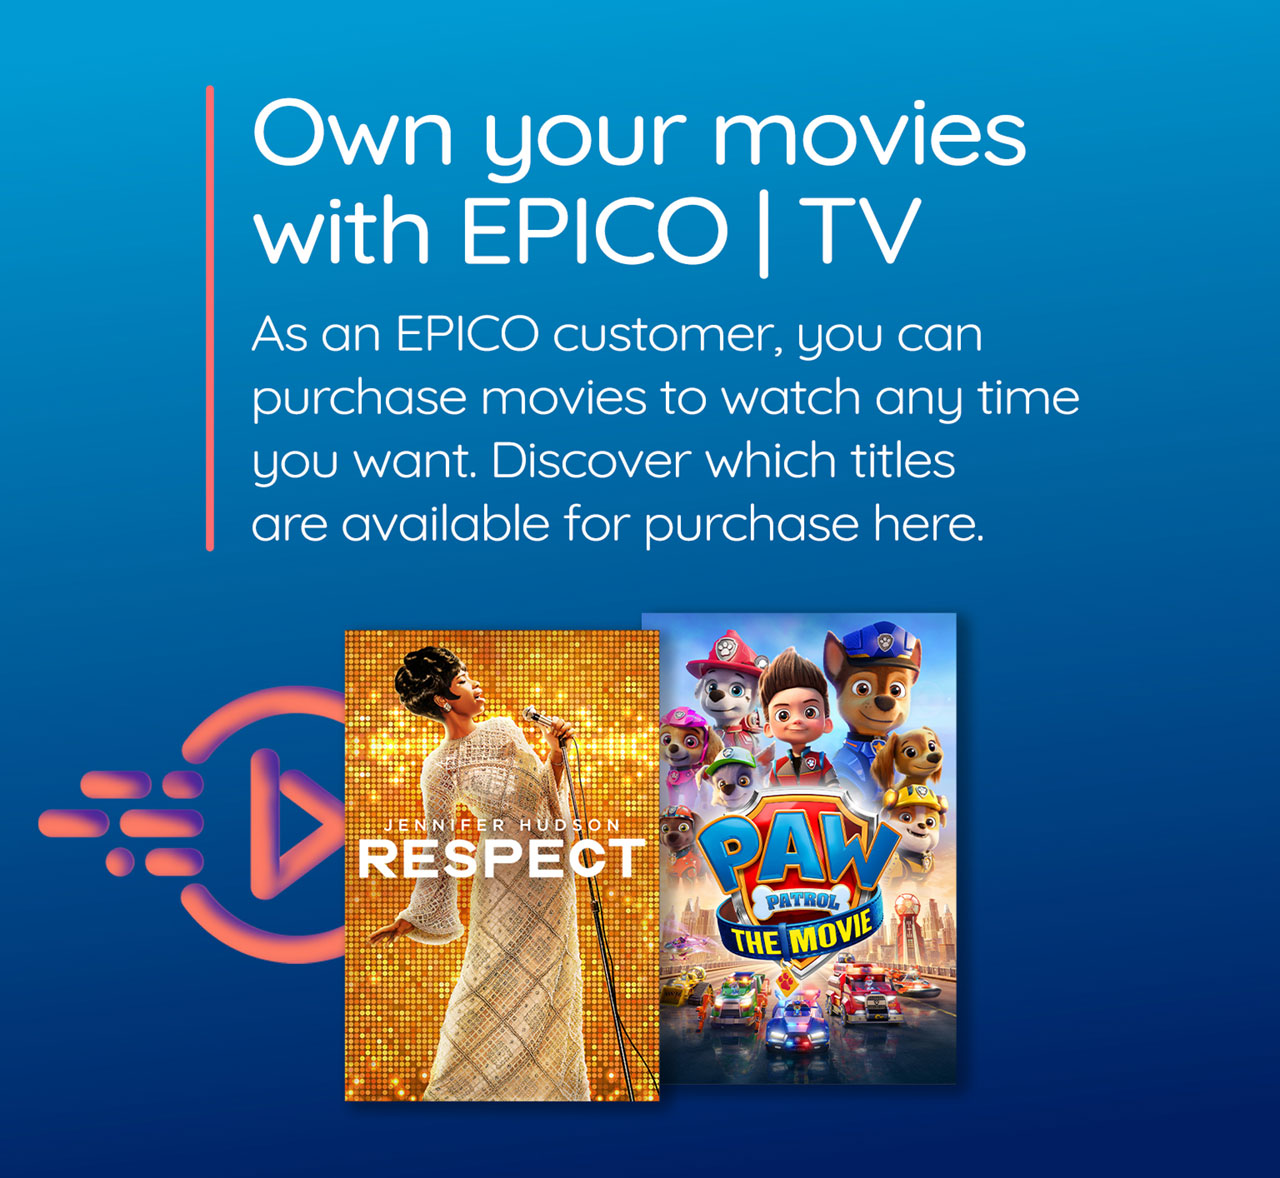 Own your movies with EPICO TV